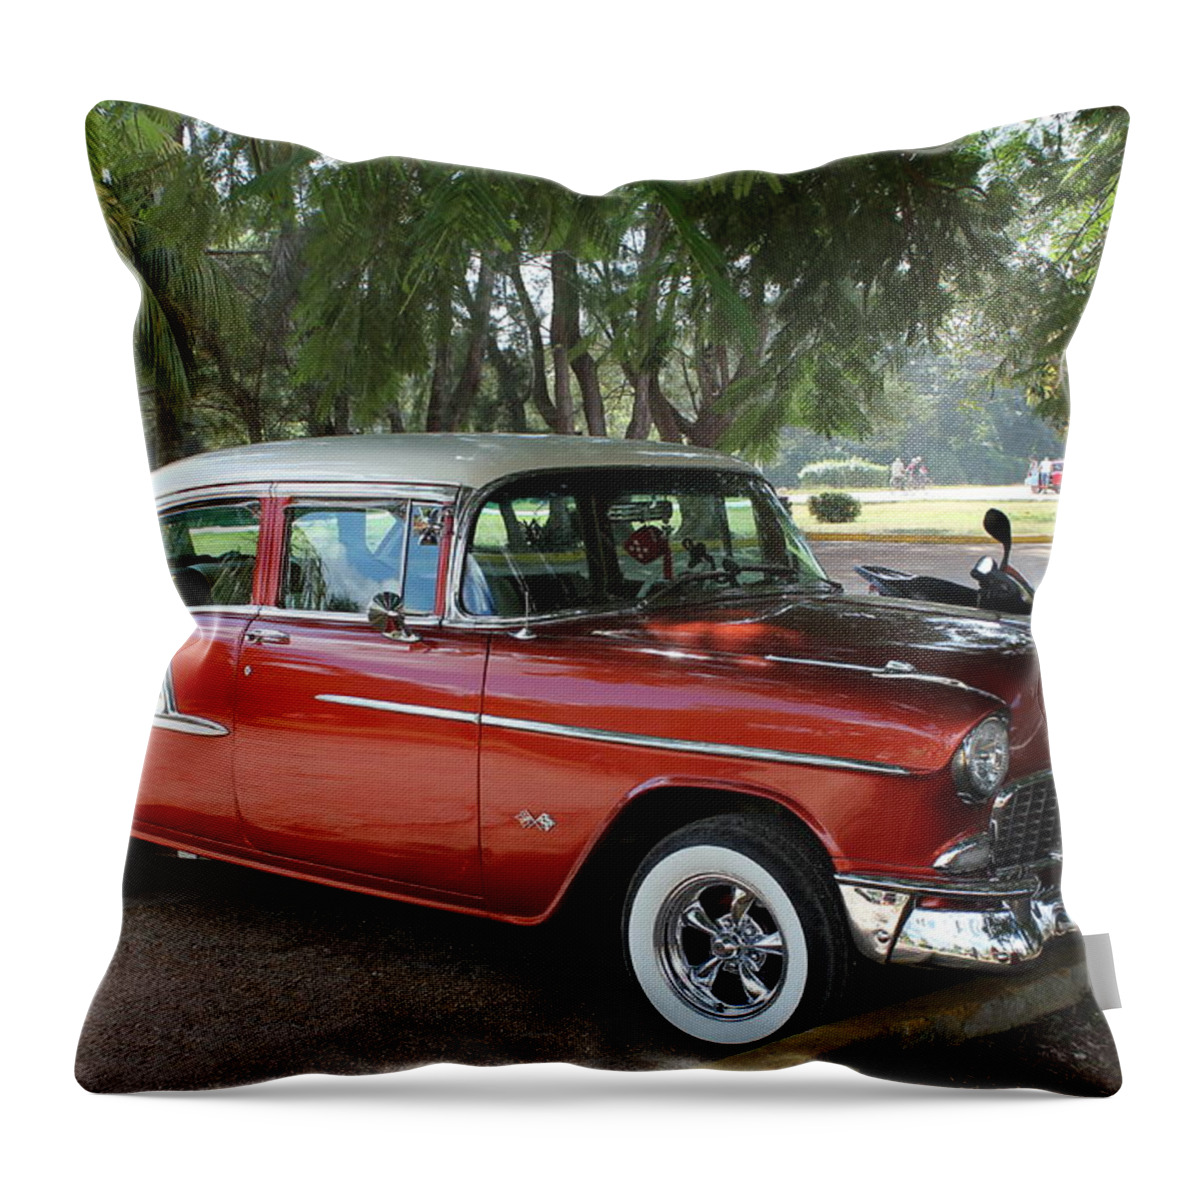 Cuba Throw Pillow featuring the photograph Lost in TIme by Ruth Kamenev